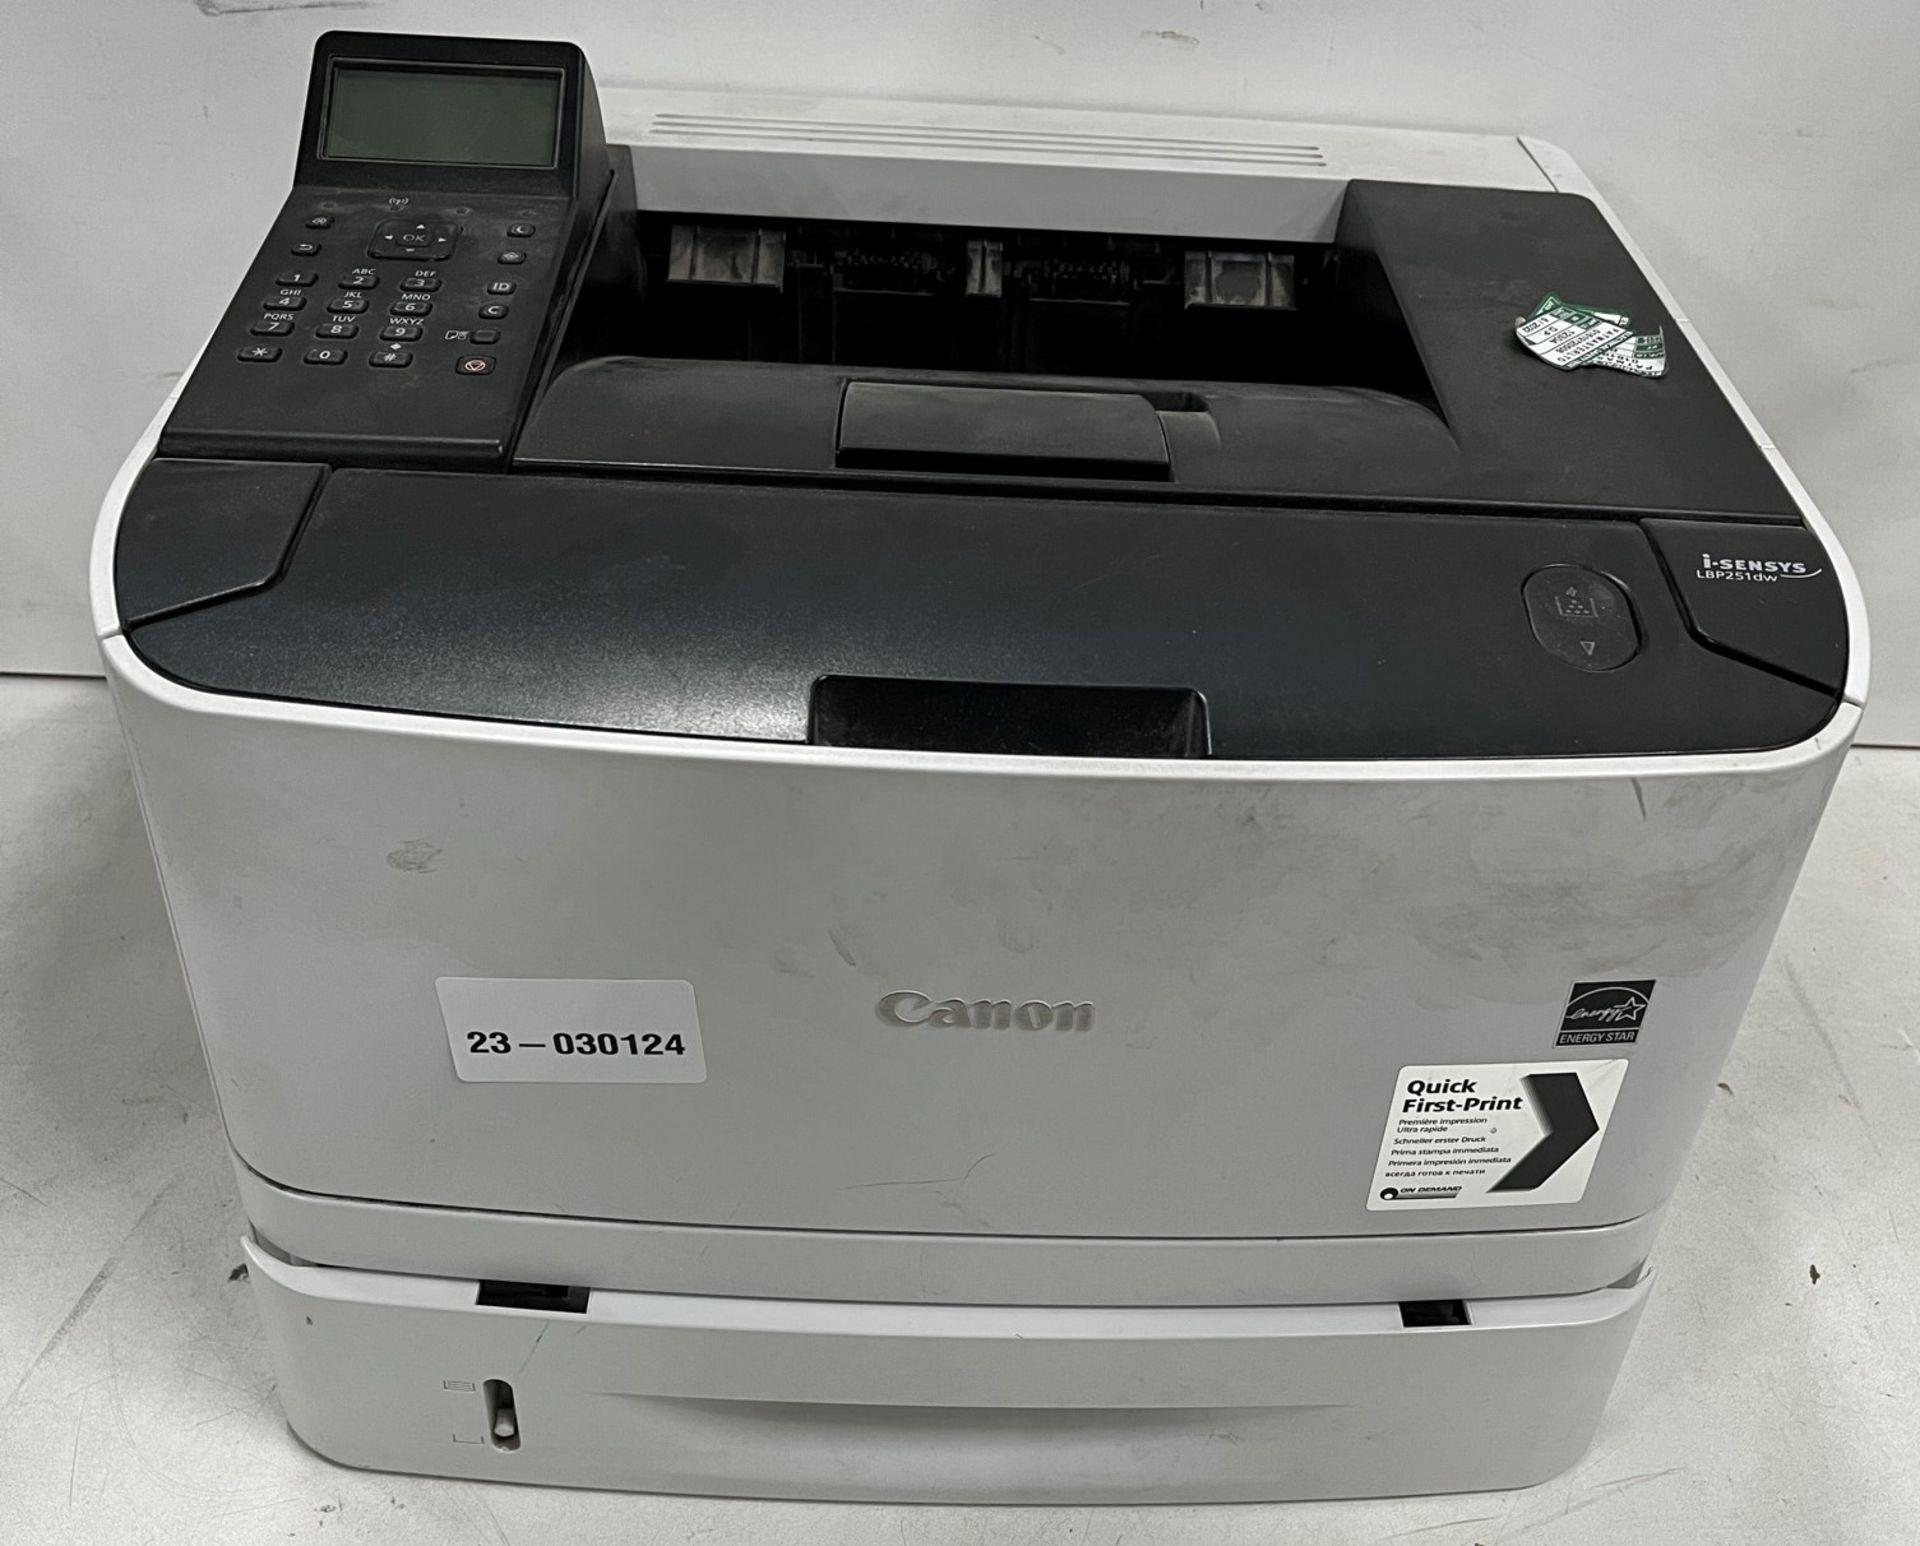 Cannon F161900 Multifunction Printer - Image 2 of 14